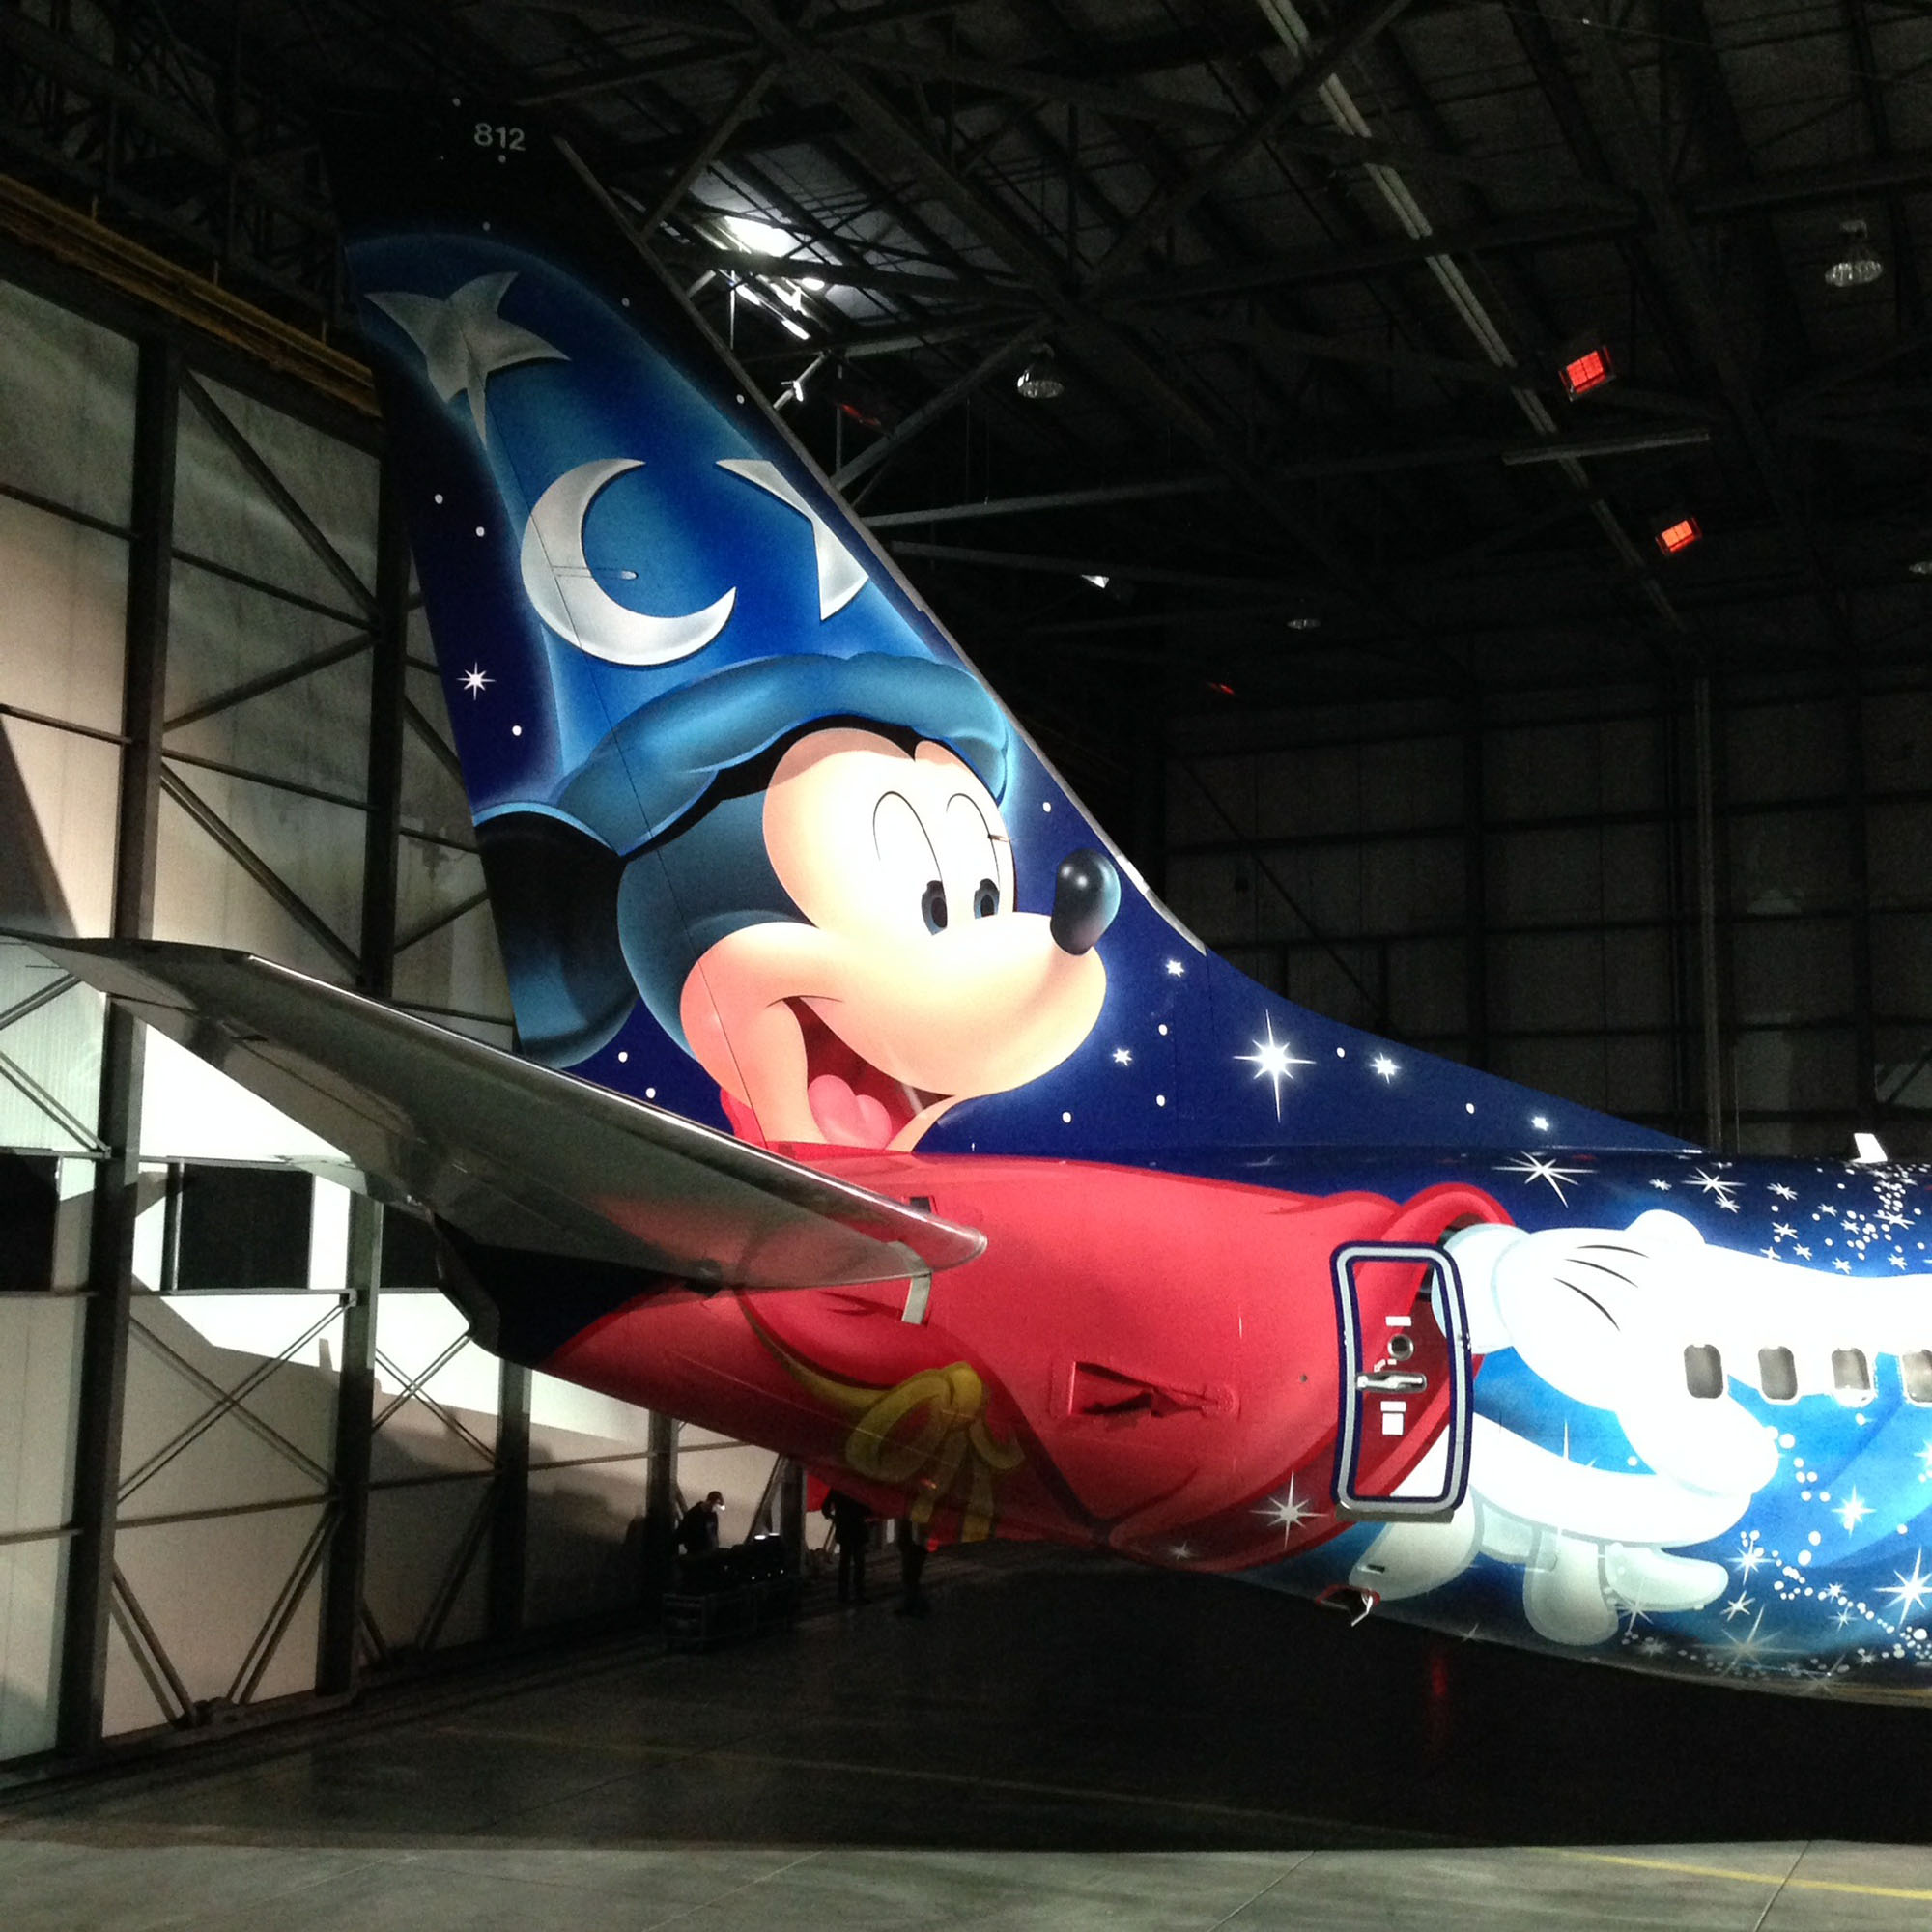 WestJet is Making the Skies a Little More Magical